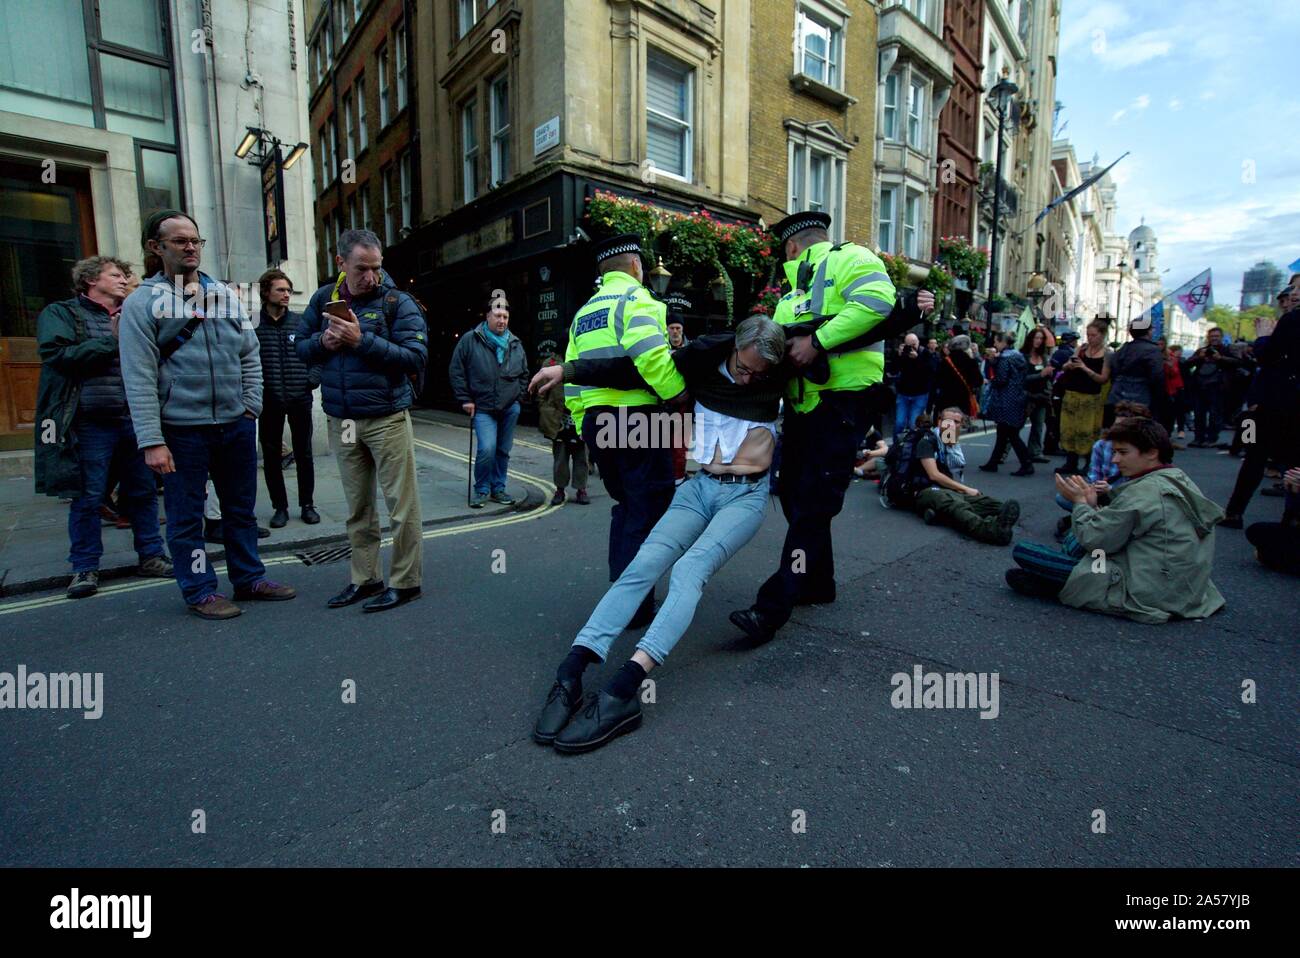 A member of climate protest group Extinction Rebellion getting arrested at the protests in Trafalgar Square in London Stock Photo